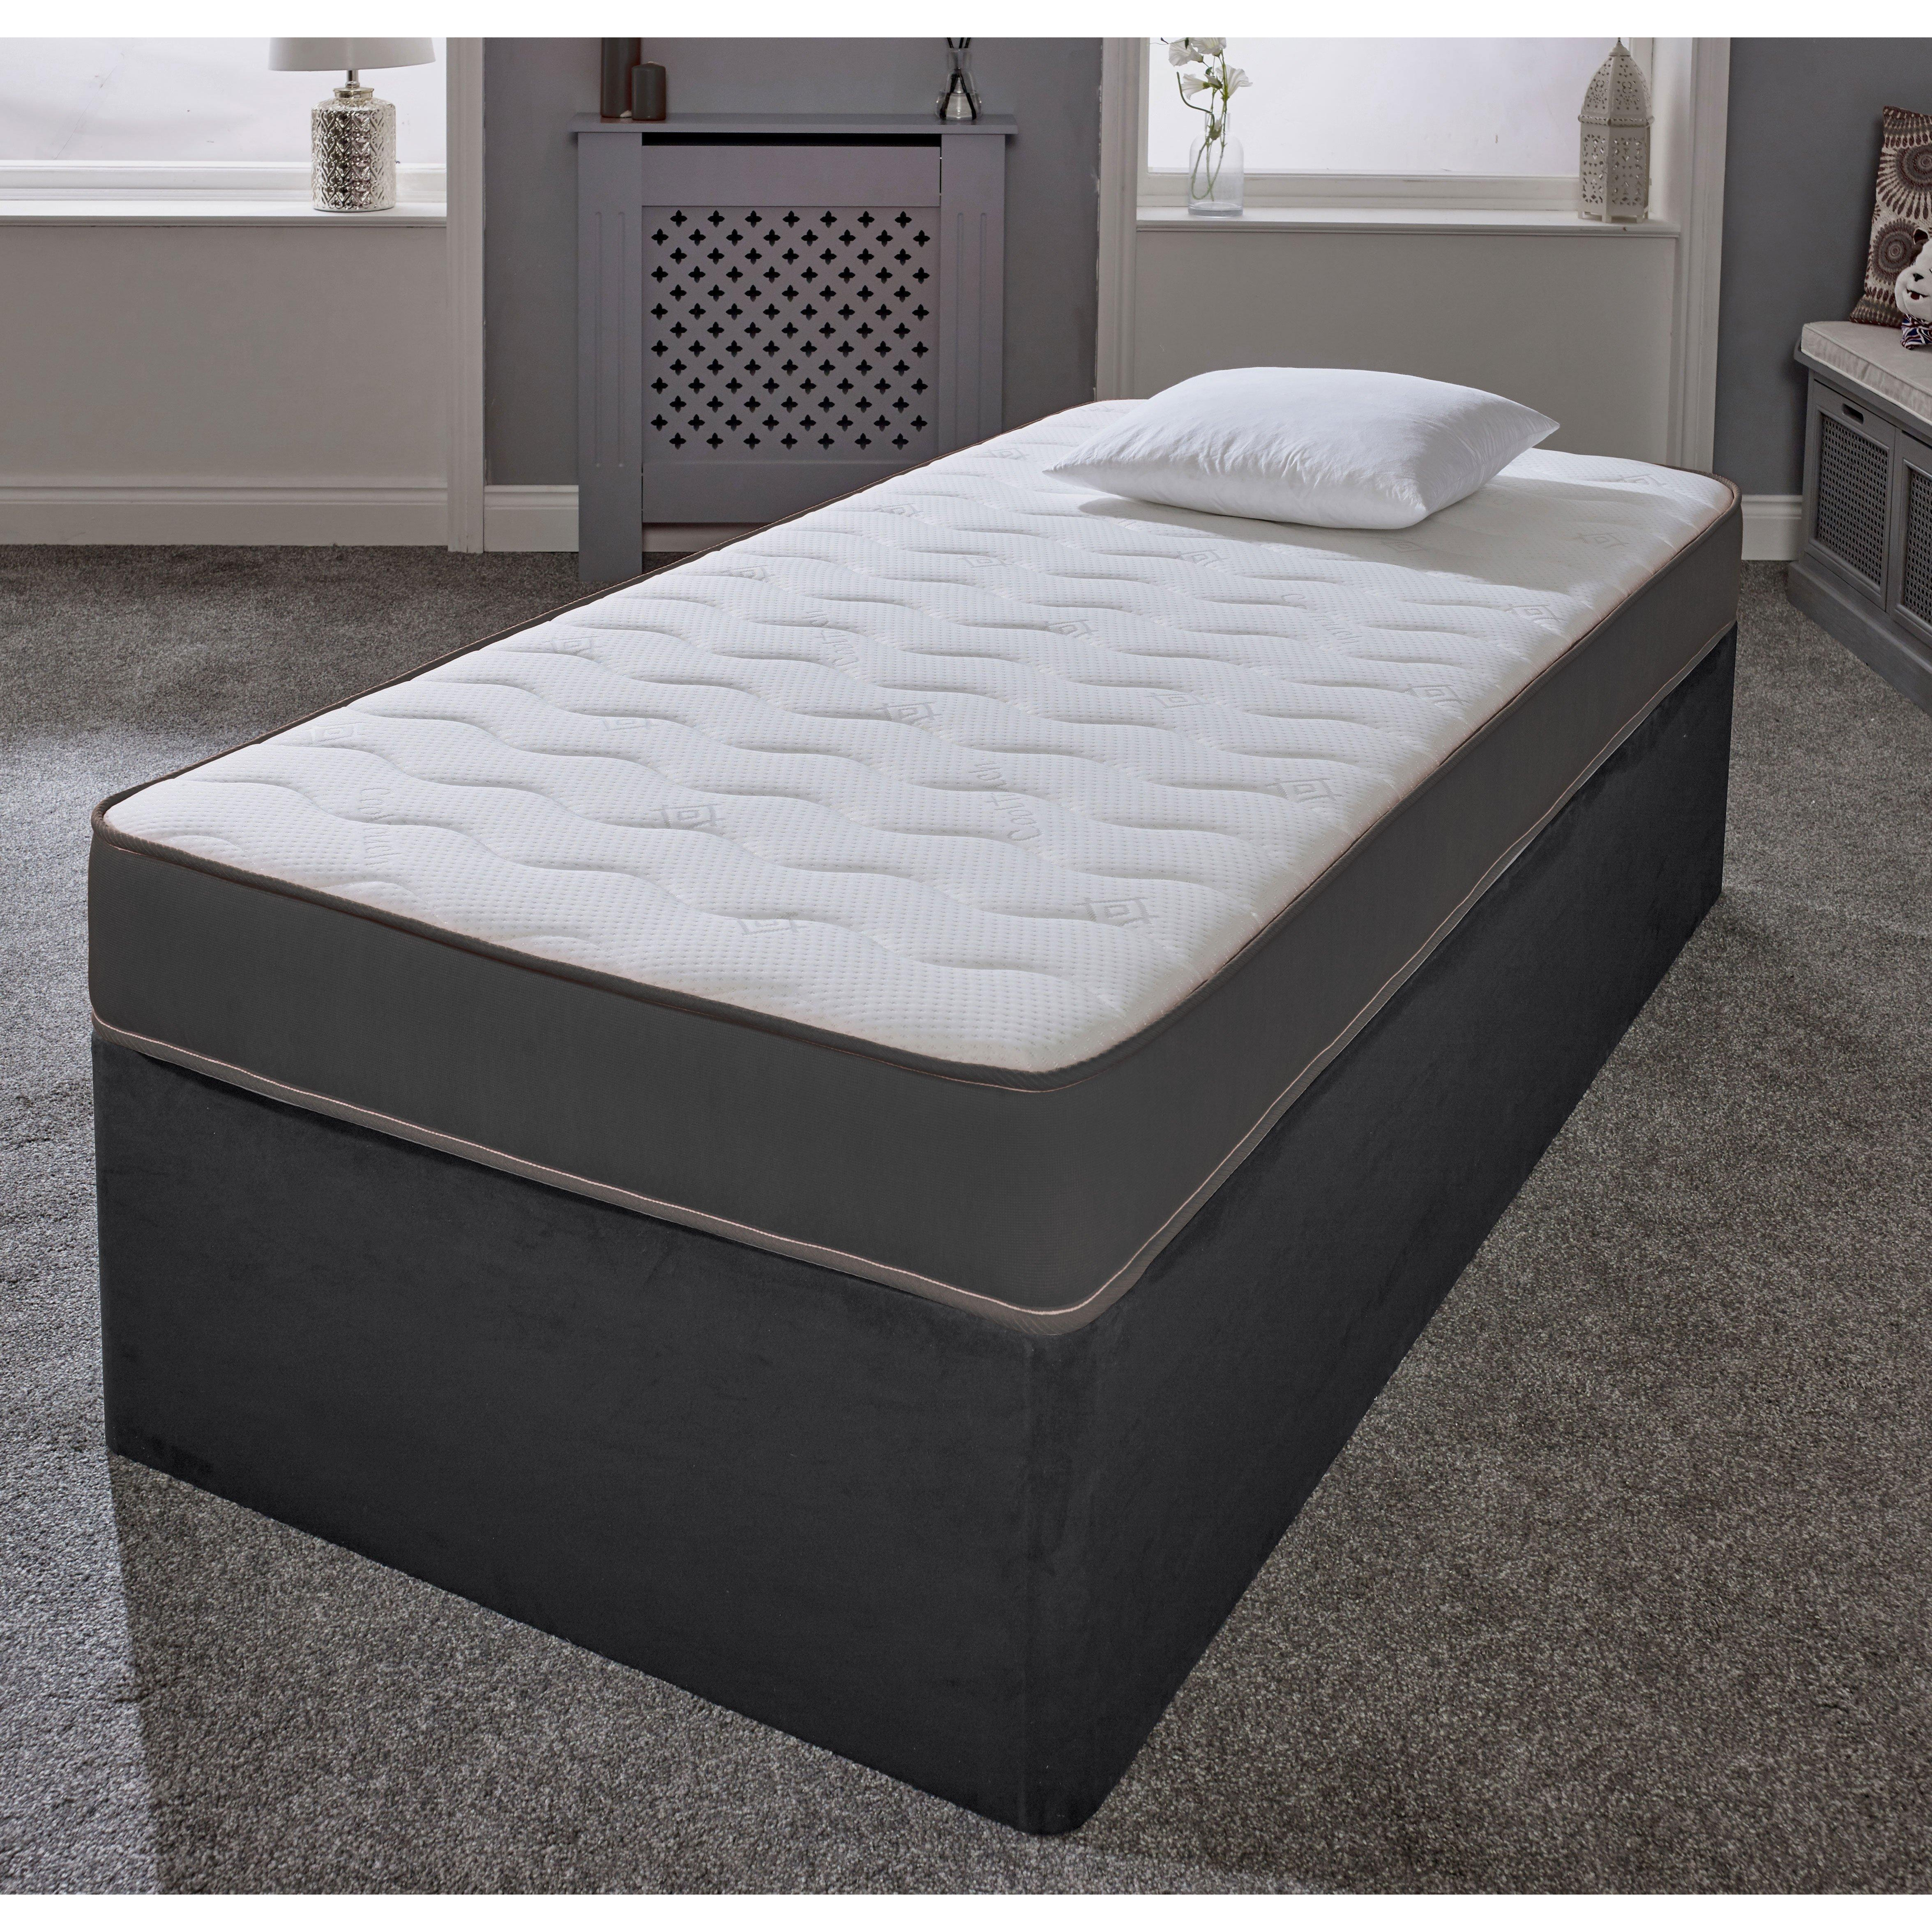 Cooltouch Essentials Wave Grey Border Quilted Hybrid Spring Mattress - image 1